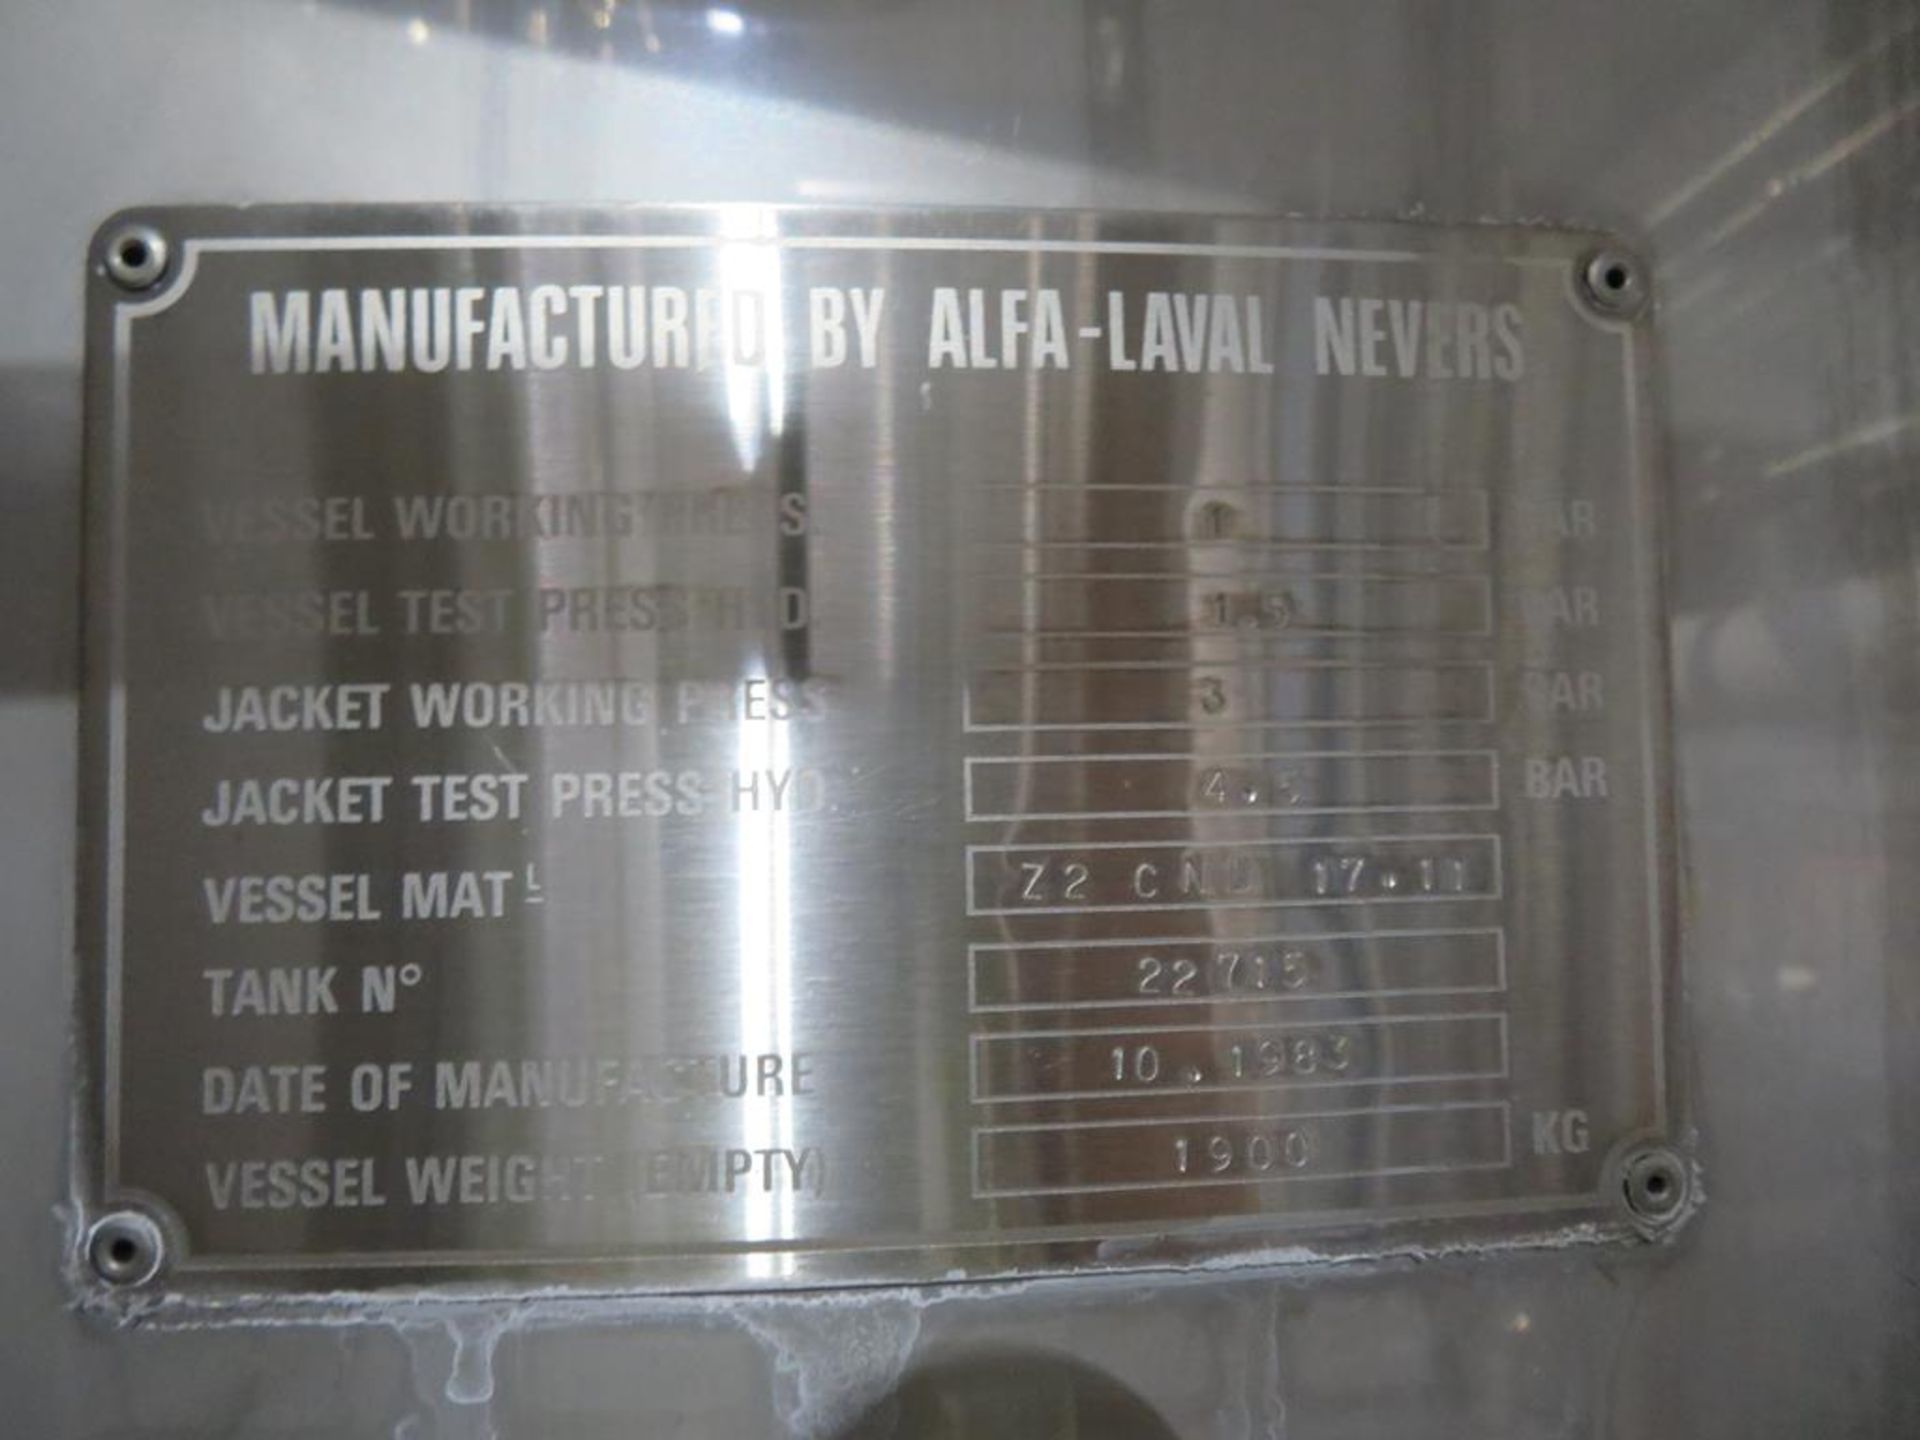 2x Alfa Laval Nevers Stainless Steel Tanks (A1 & A2) - Image 2 of 14